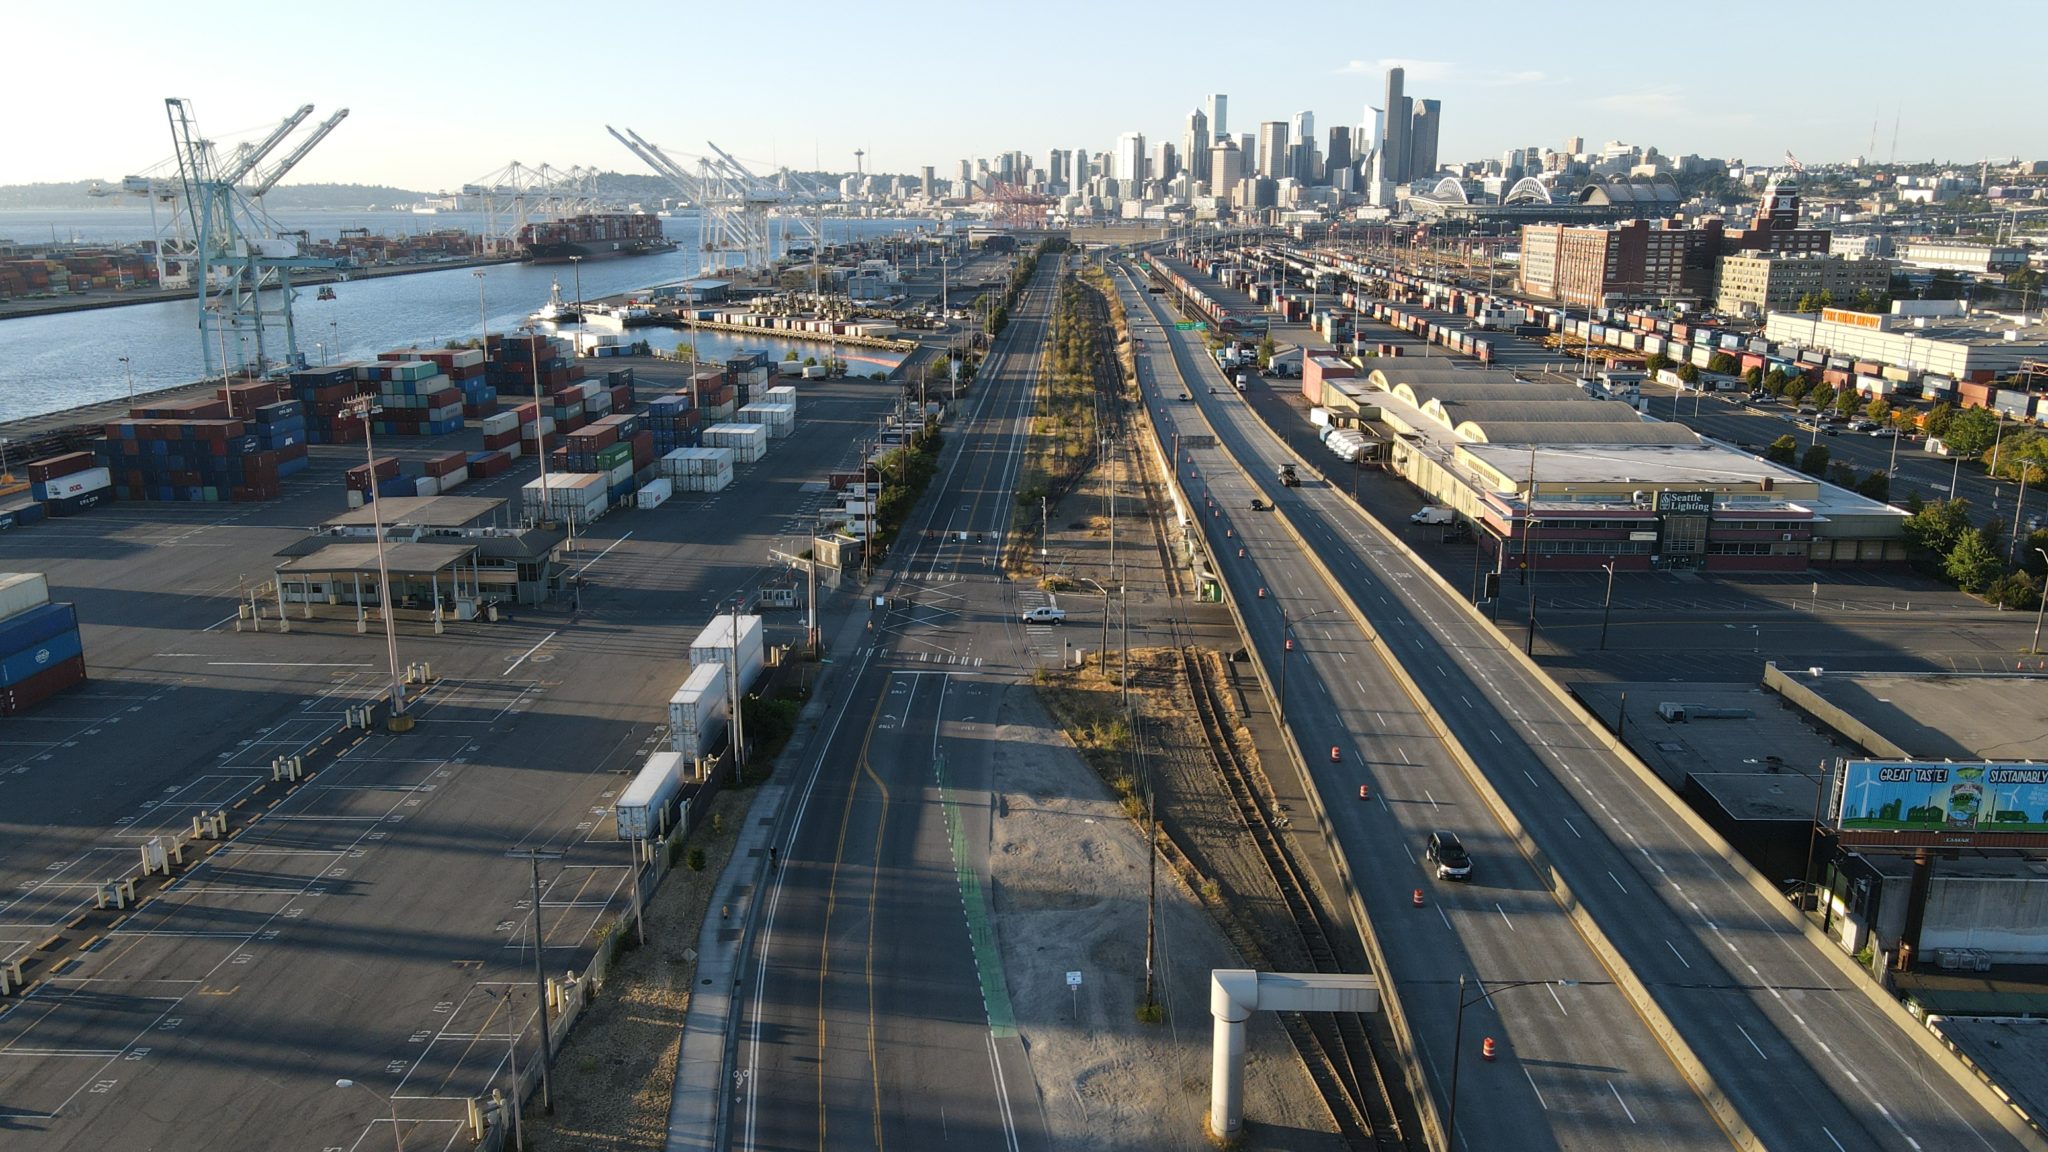 View of East Marginal Way S, looking north toward downtown Seattle. The roadway is visible in the center of the picture, with Port of Seattle cranes visible in the upper left, and downtown Seattle skyscrapers in the background.